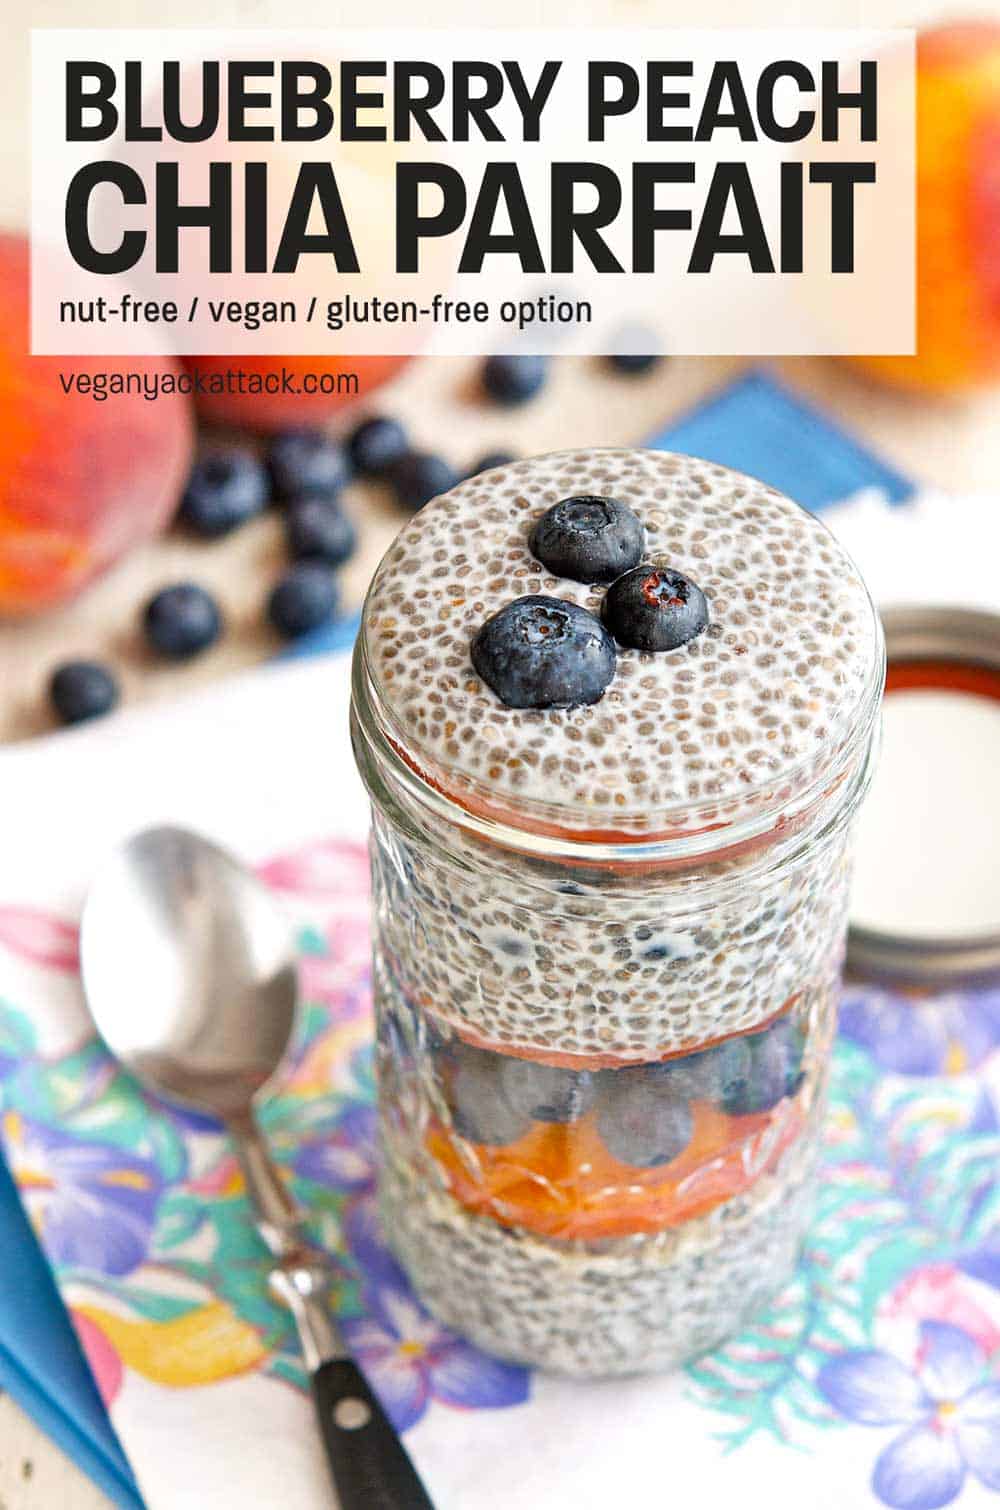 Blueberry peach chia parfait in a glass jar on a floral linen